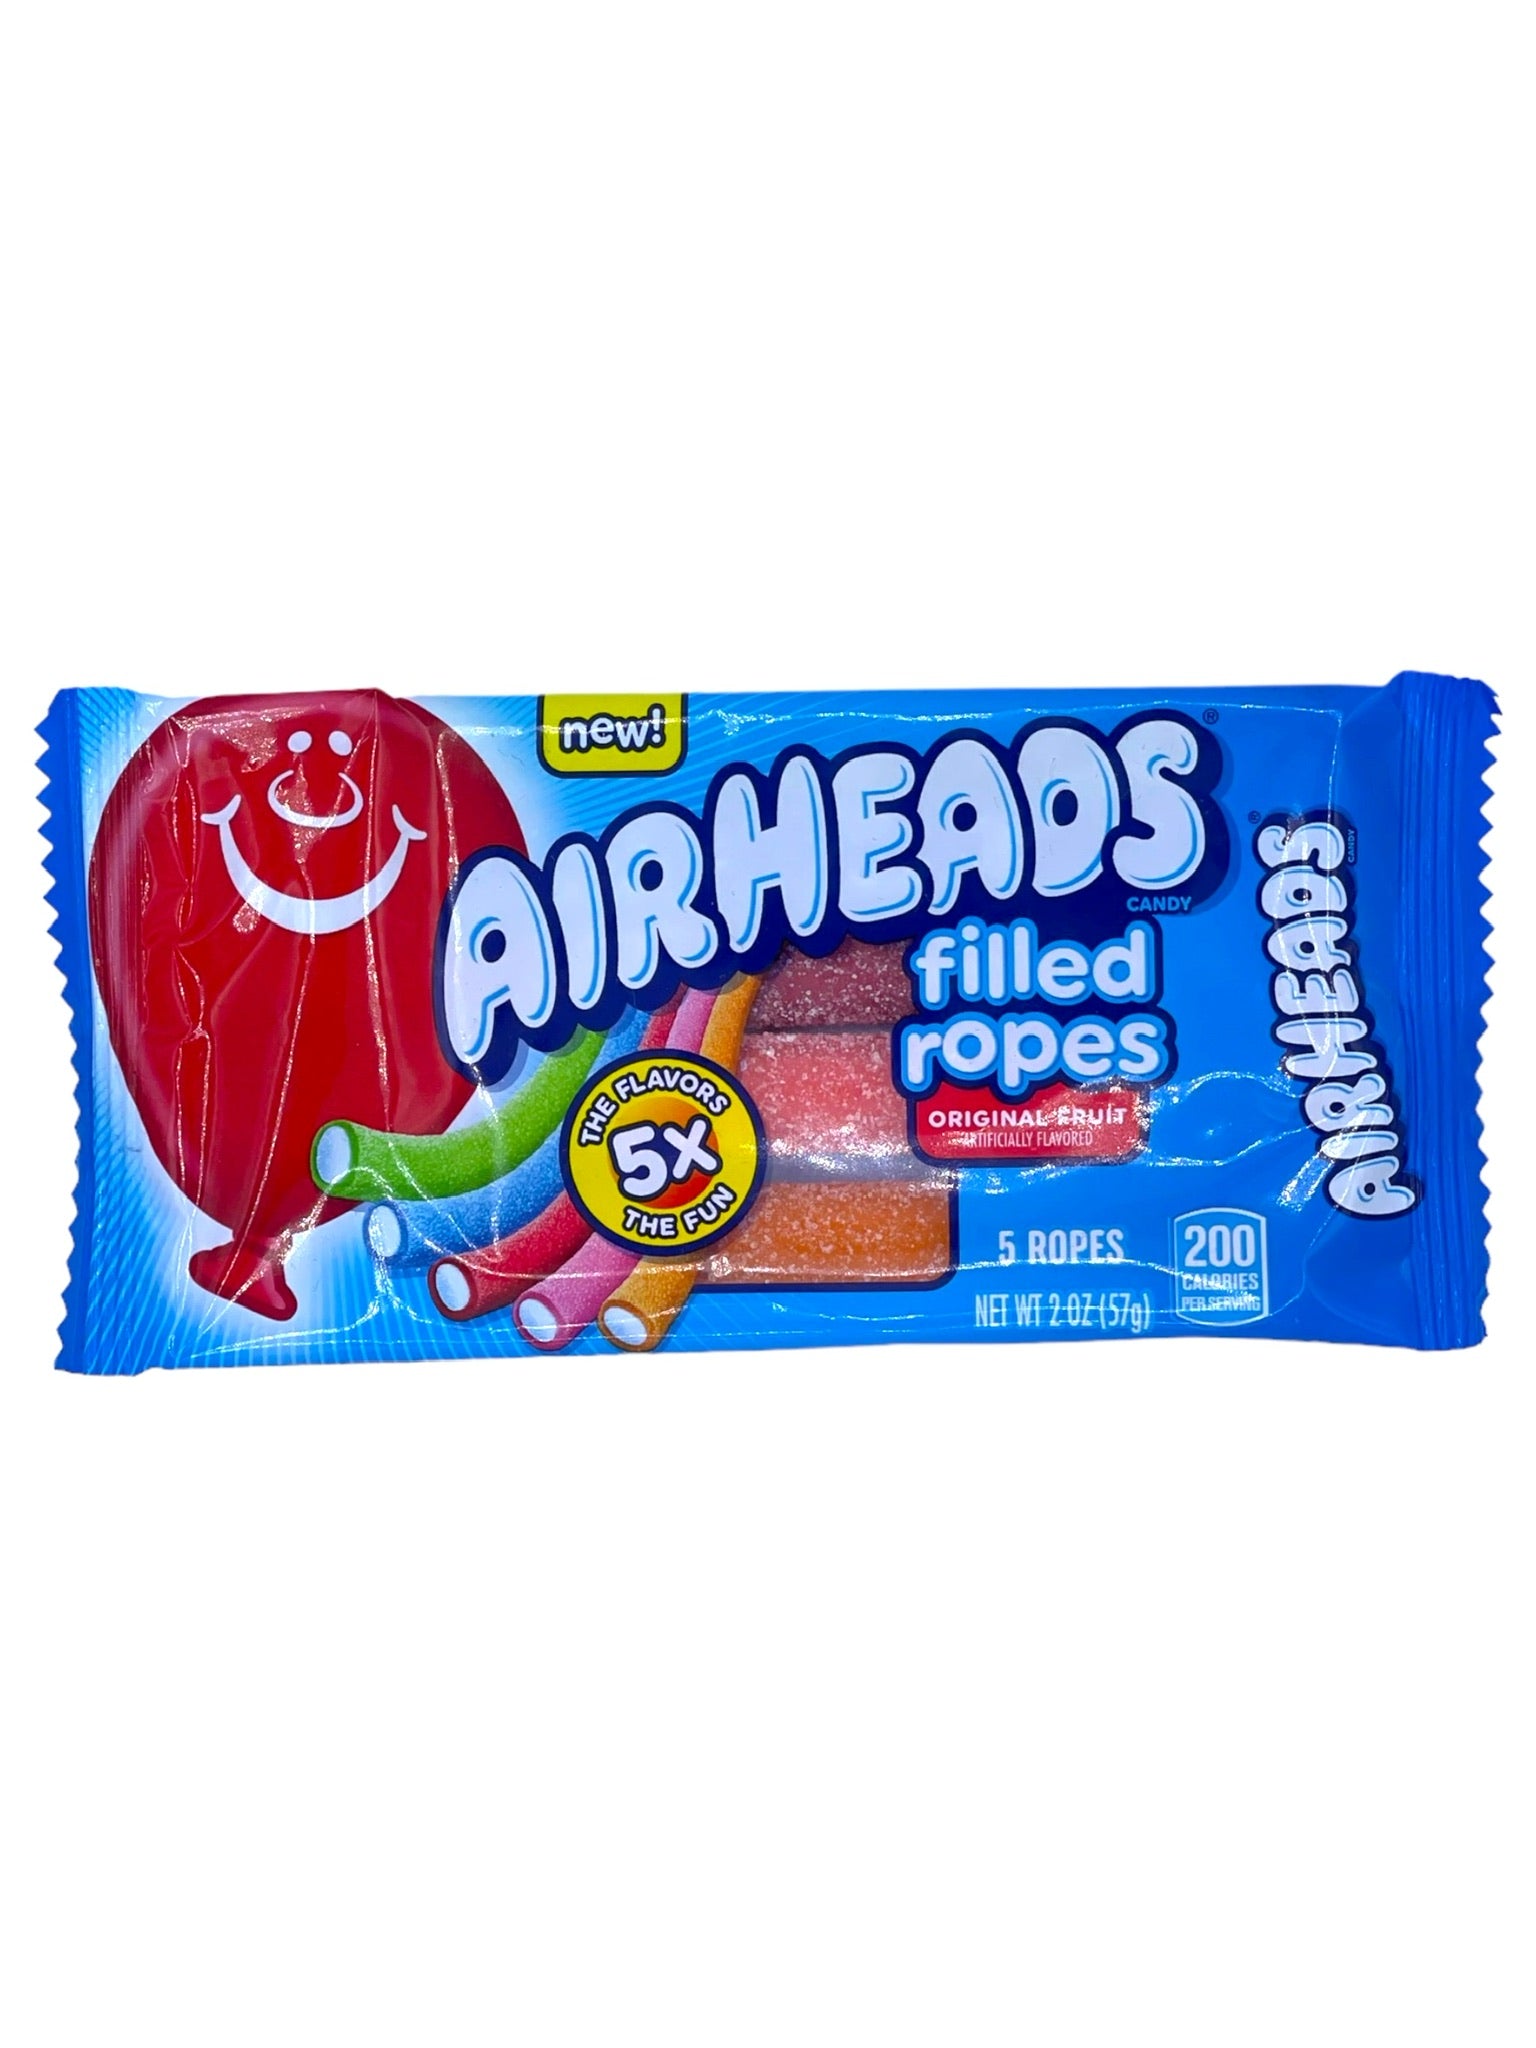 Airheads Filled Ropes 